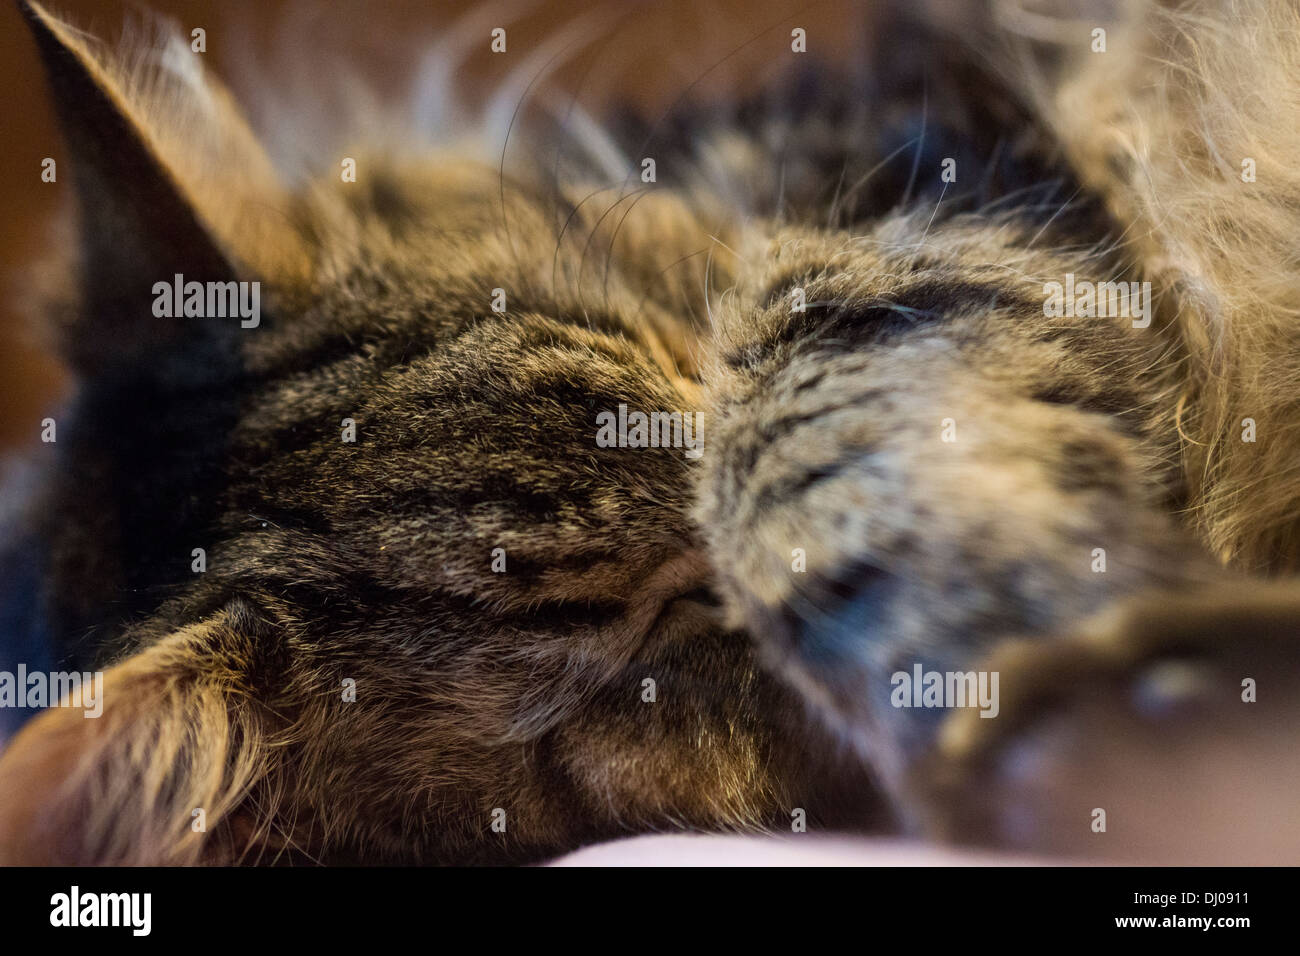 cat sleeping head whiskers paws curled up relaxing Stock Photo